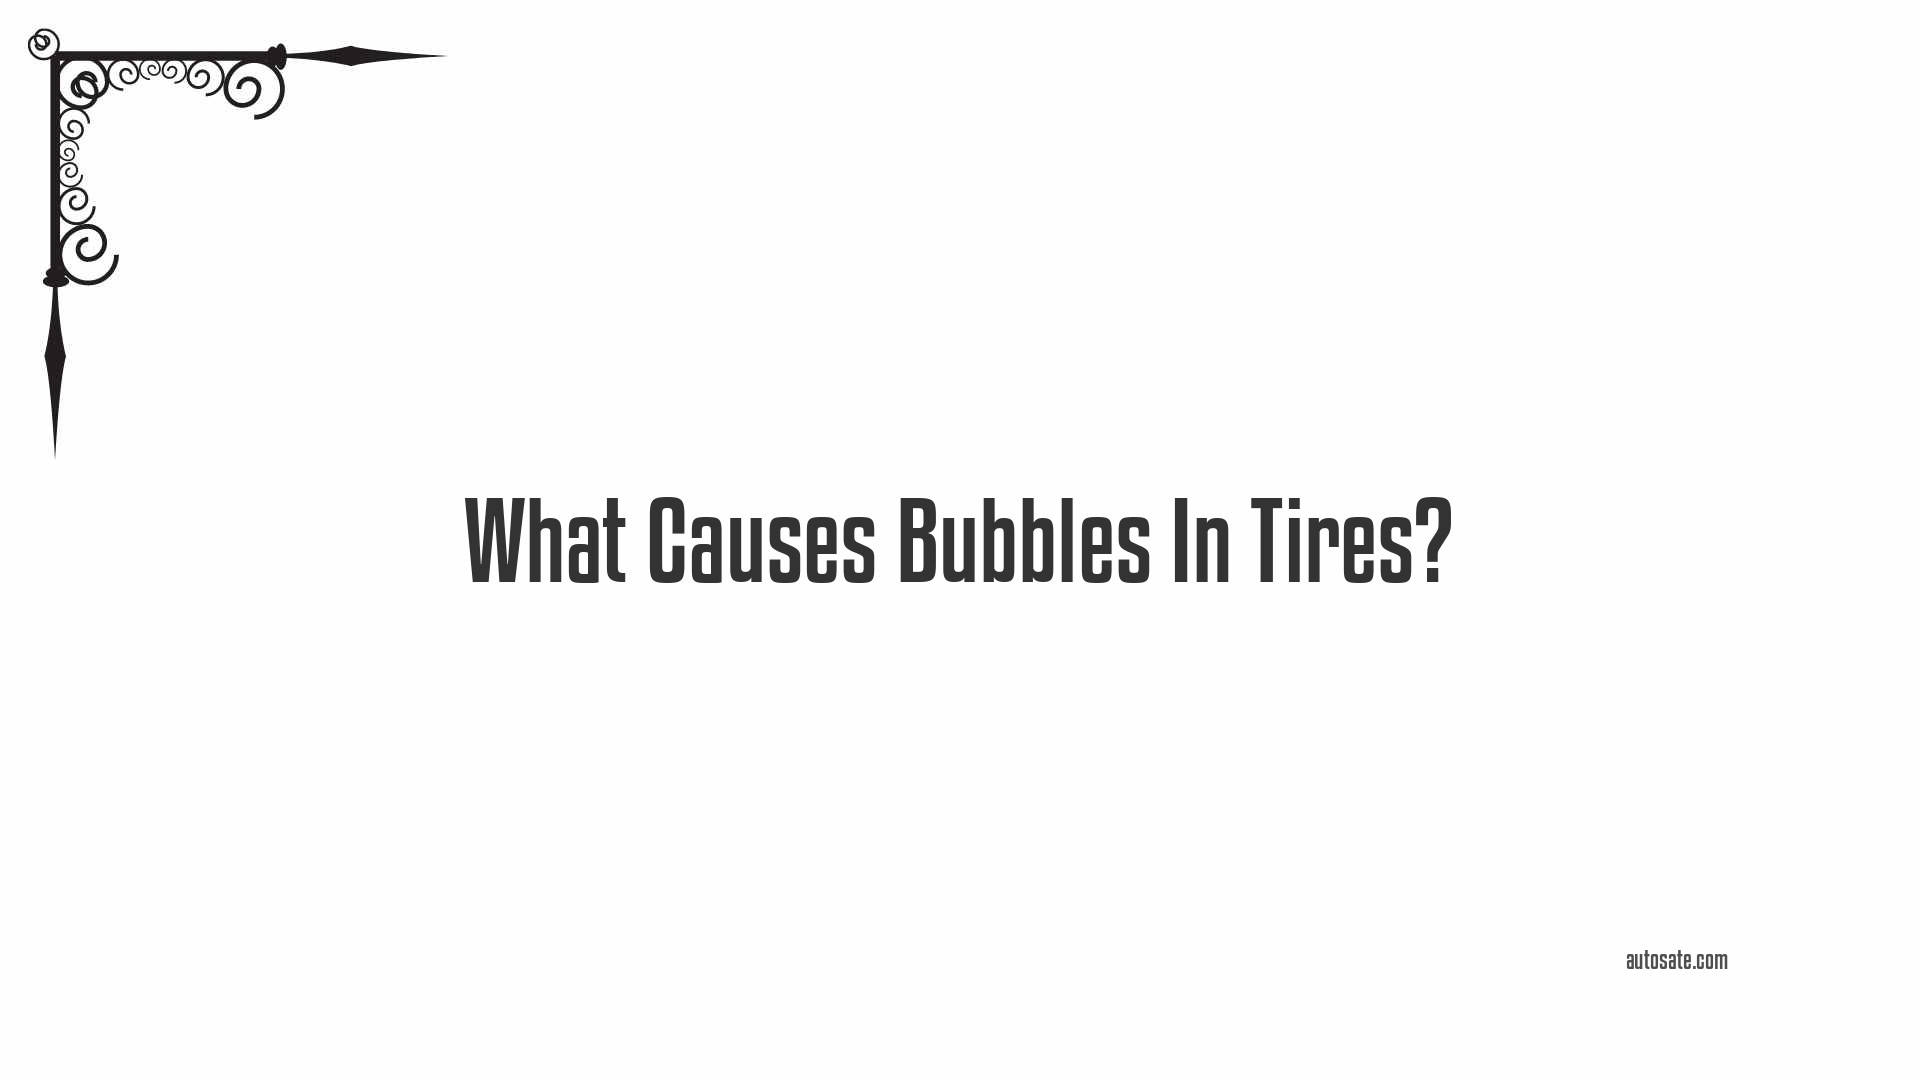 What Causes Bubbles In Tires?